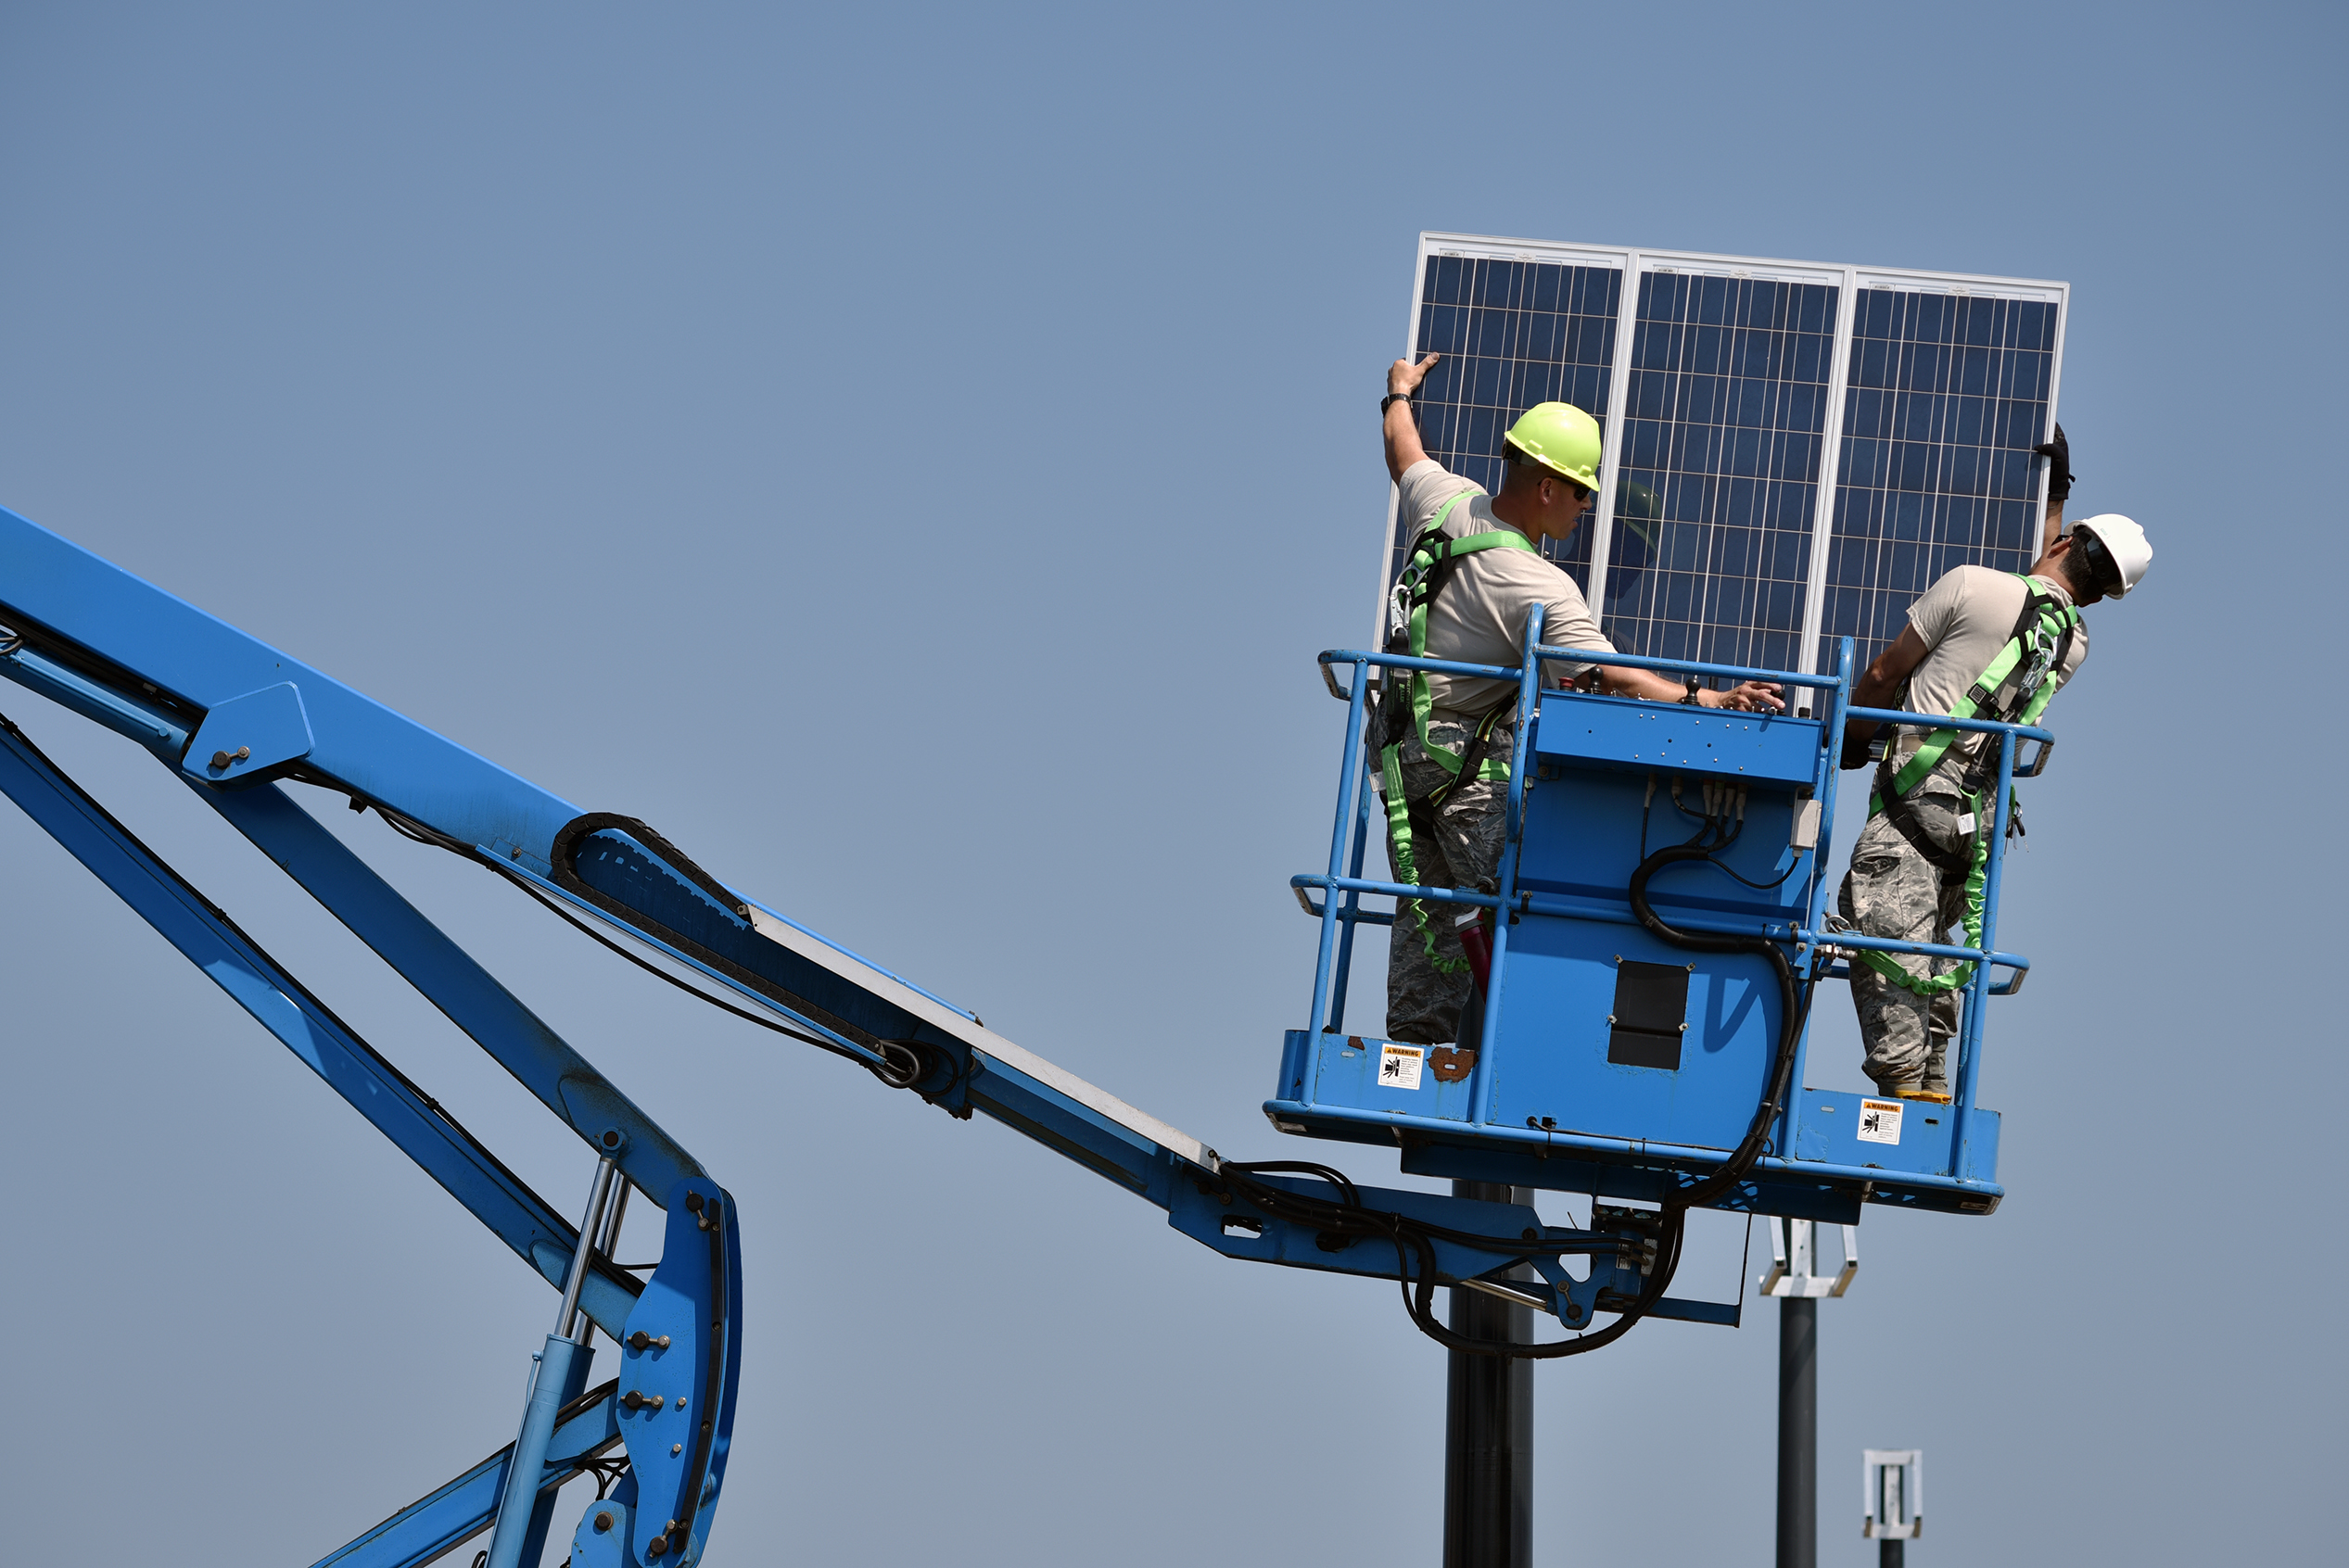 Workers in a lift with a solar panel